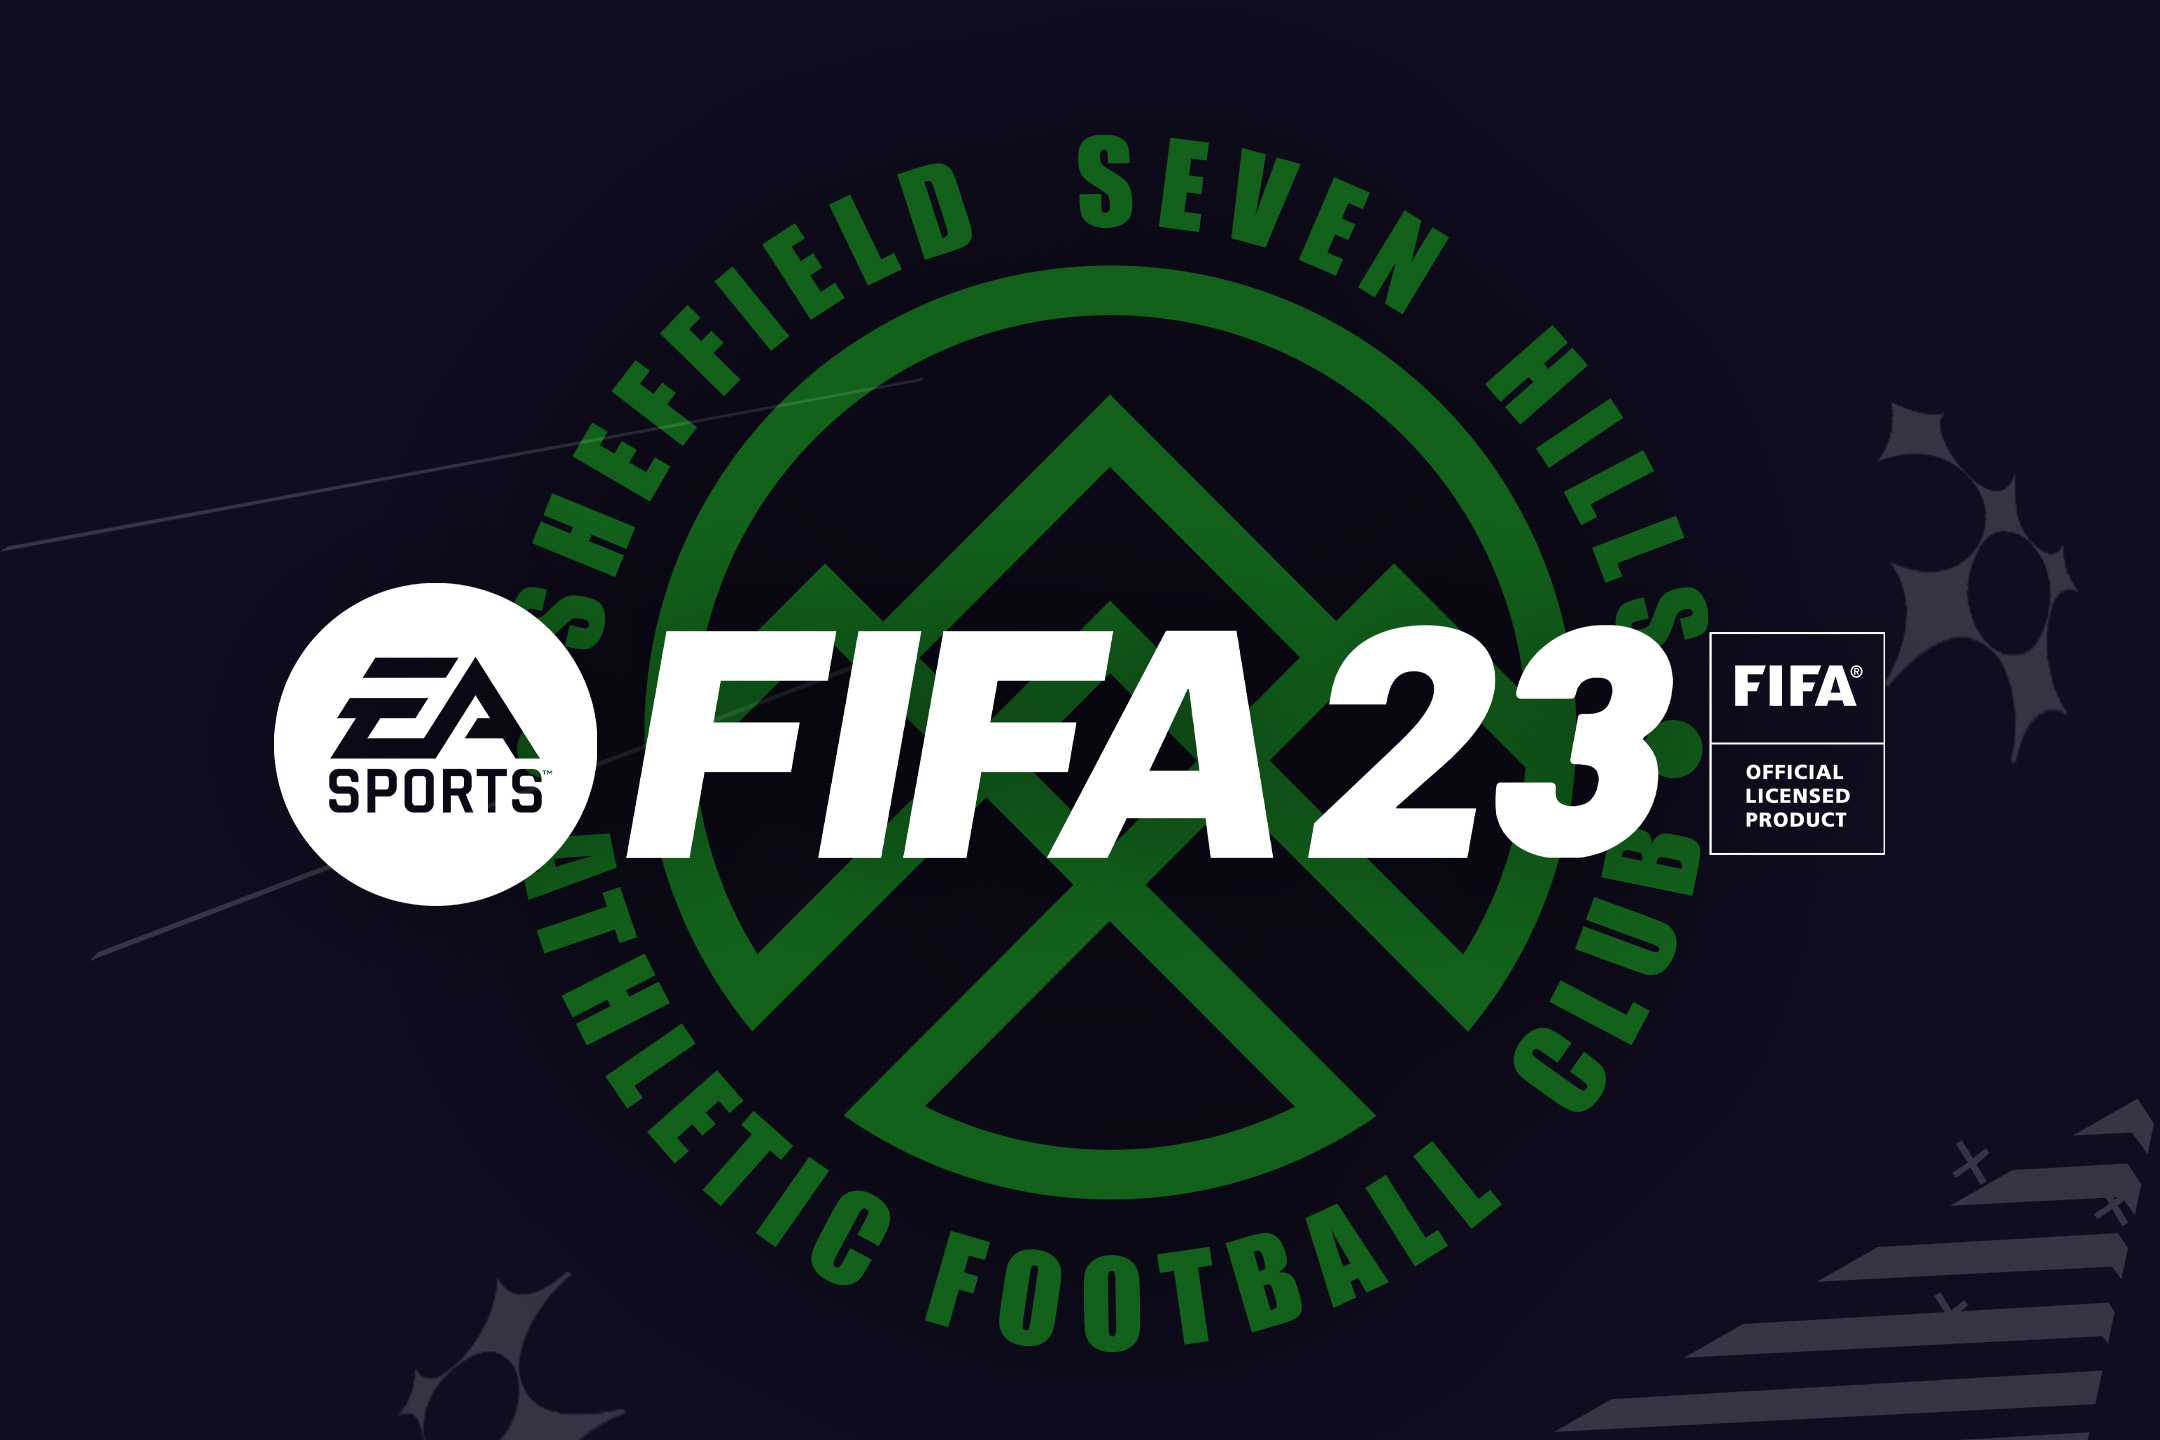 Play as SSHAFC on FIFA 23